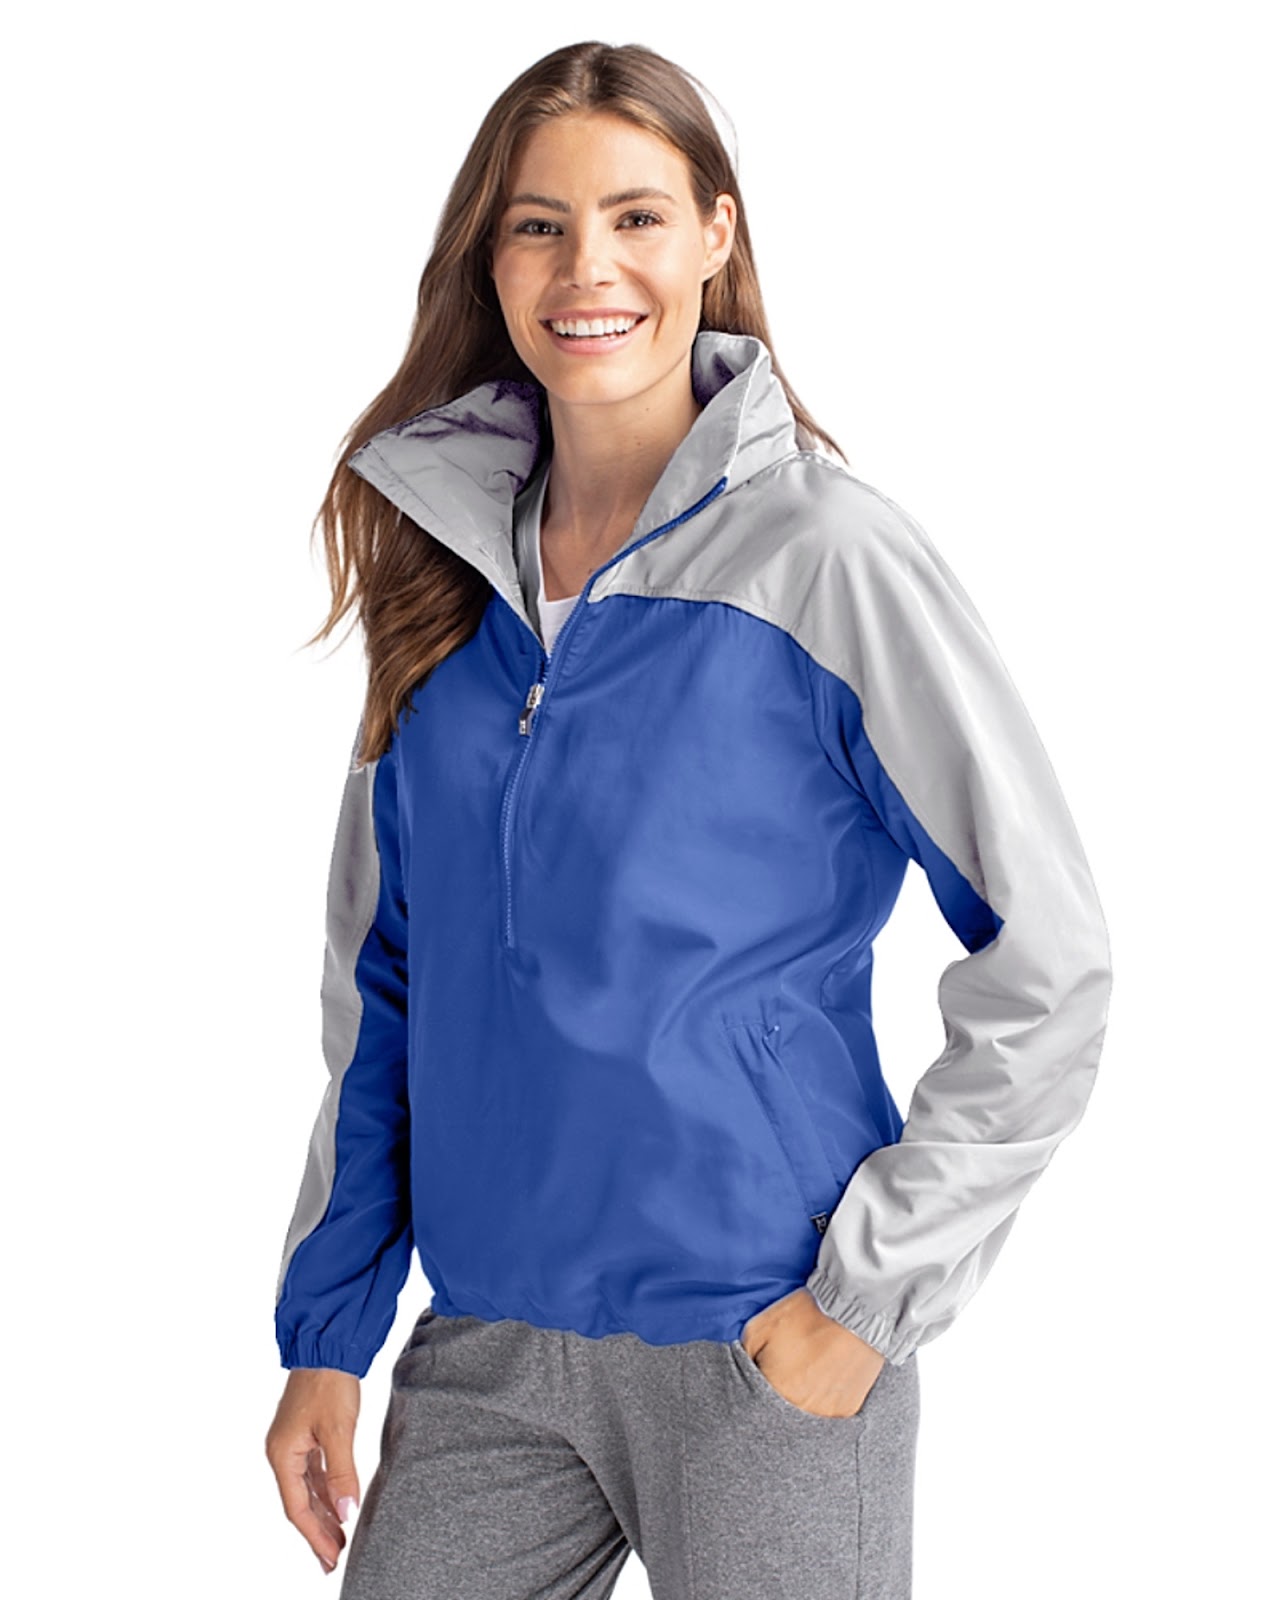 Woman wearing Cutter & Buck Charter Eco Recycled Womens Anorak Jacket in Tour Blue/Polished or Blue/Grey